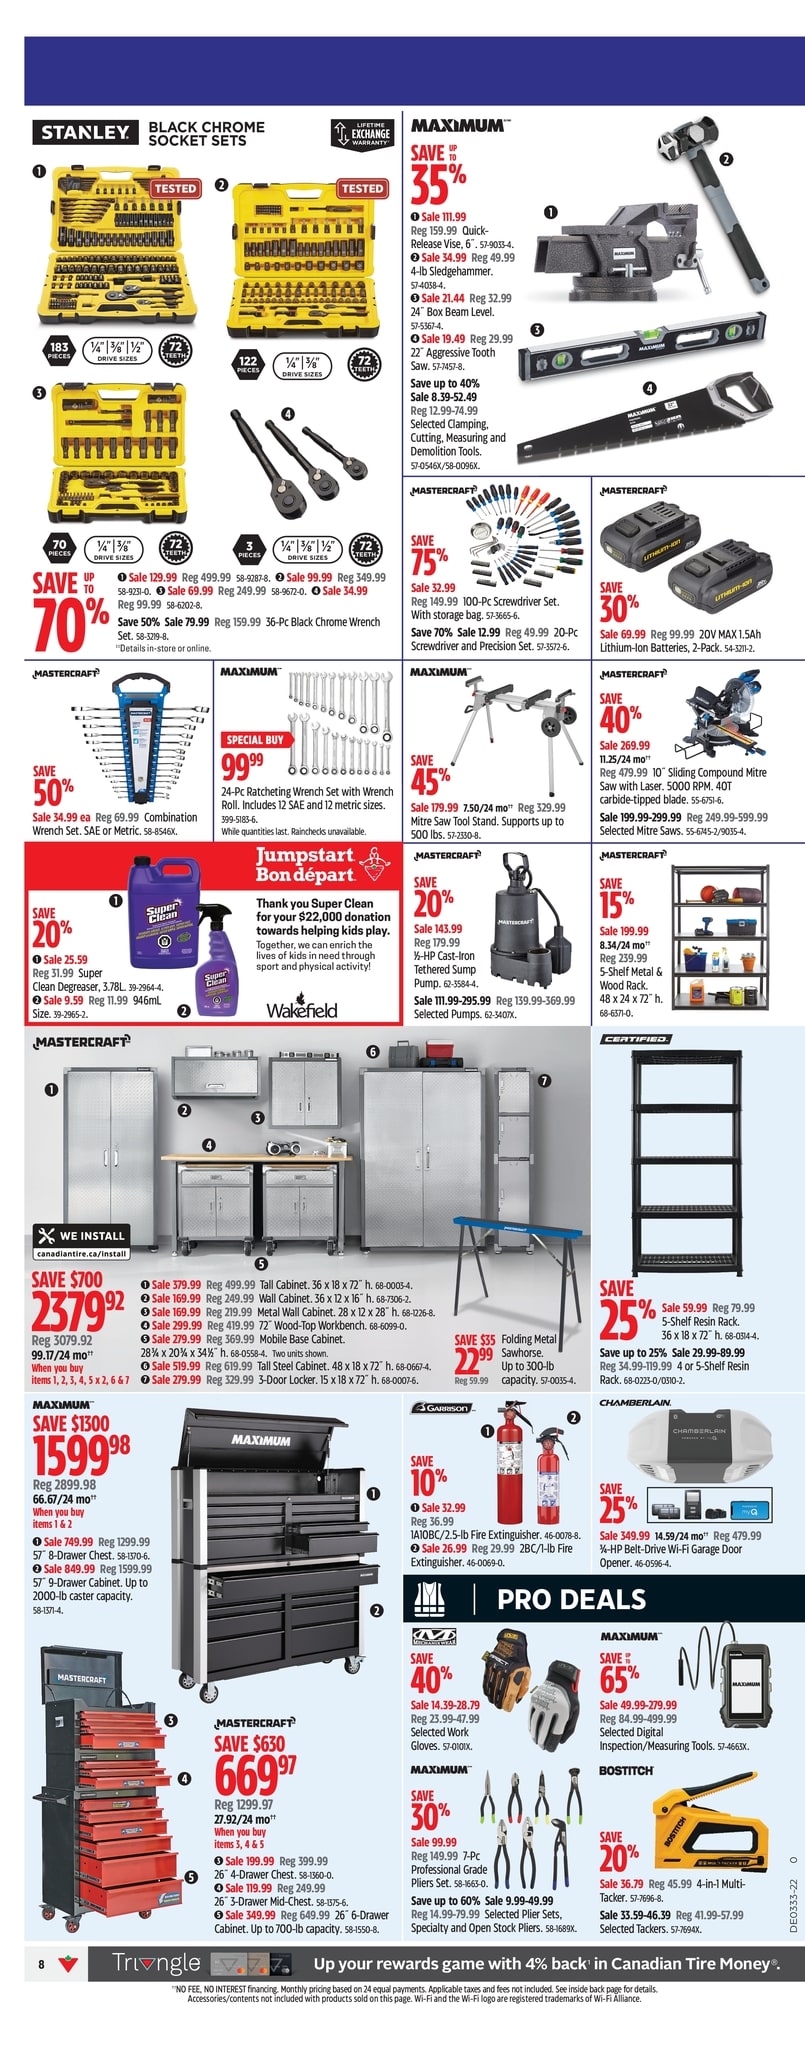 Canadian Tire - Weekly Flyer Specials - Page 8